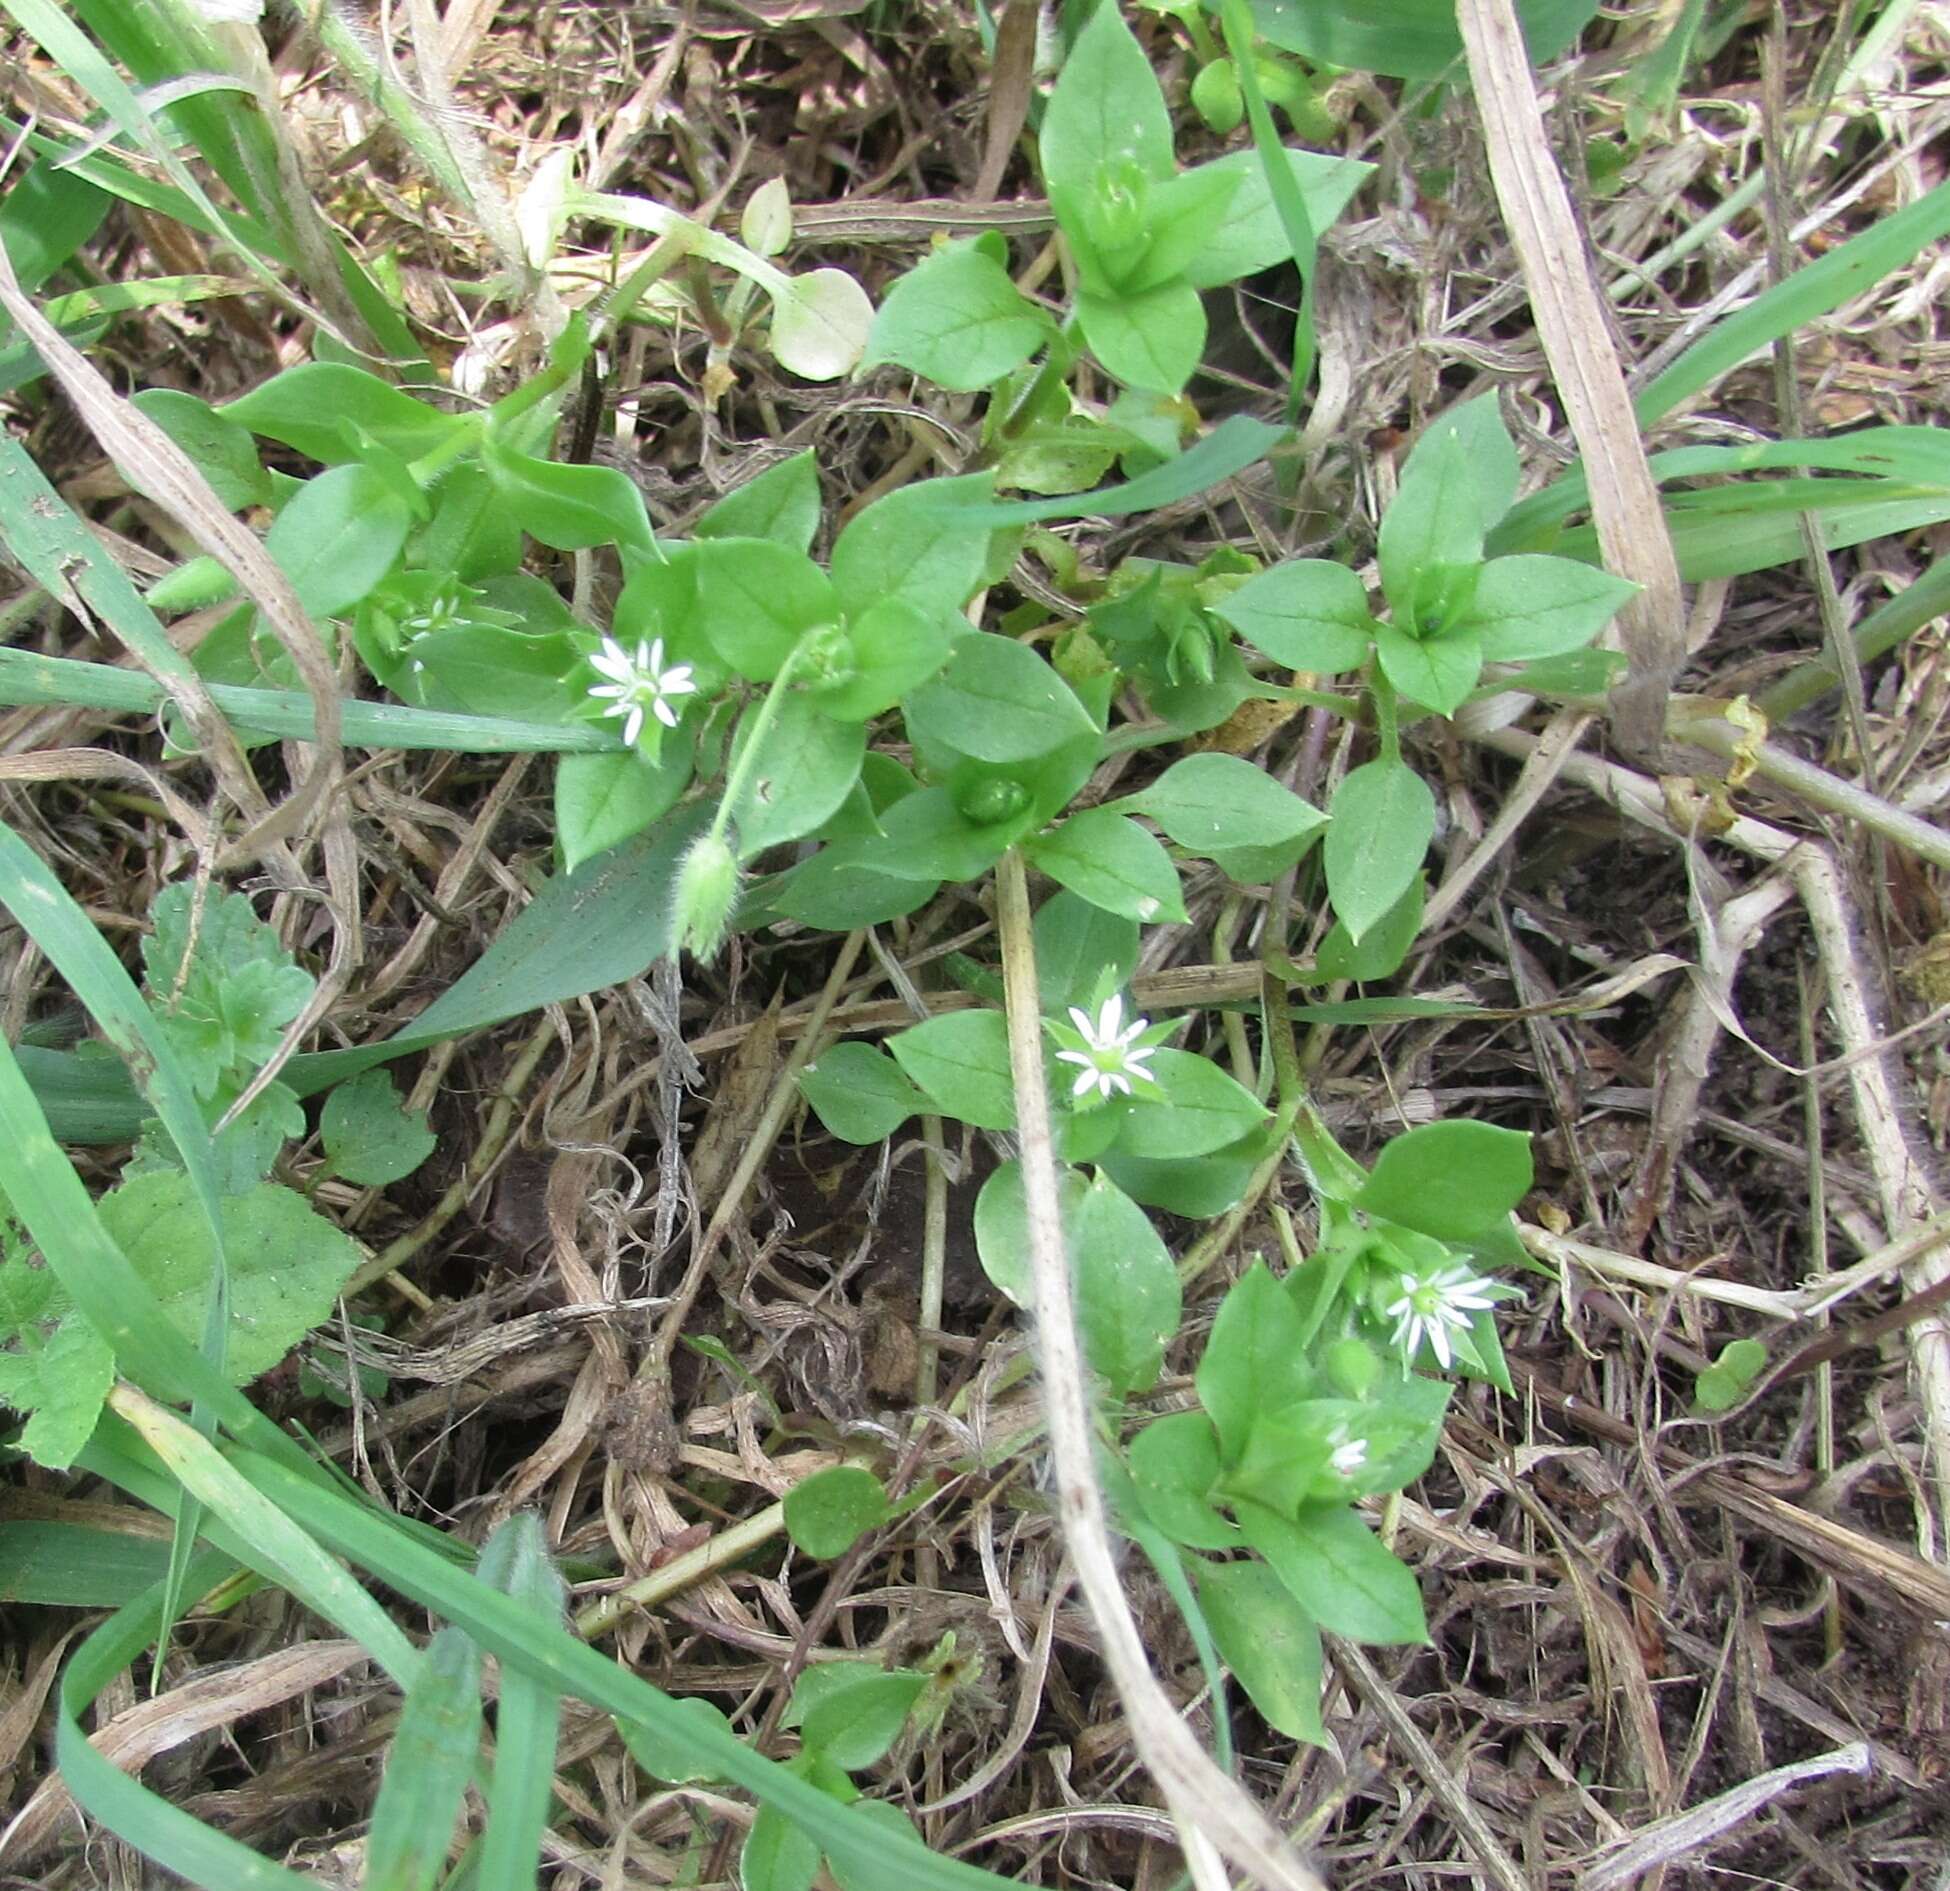 Image of common chickweed